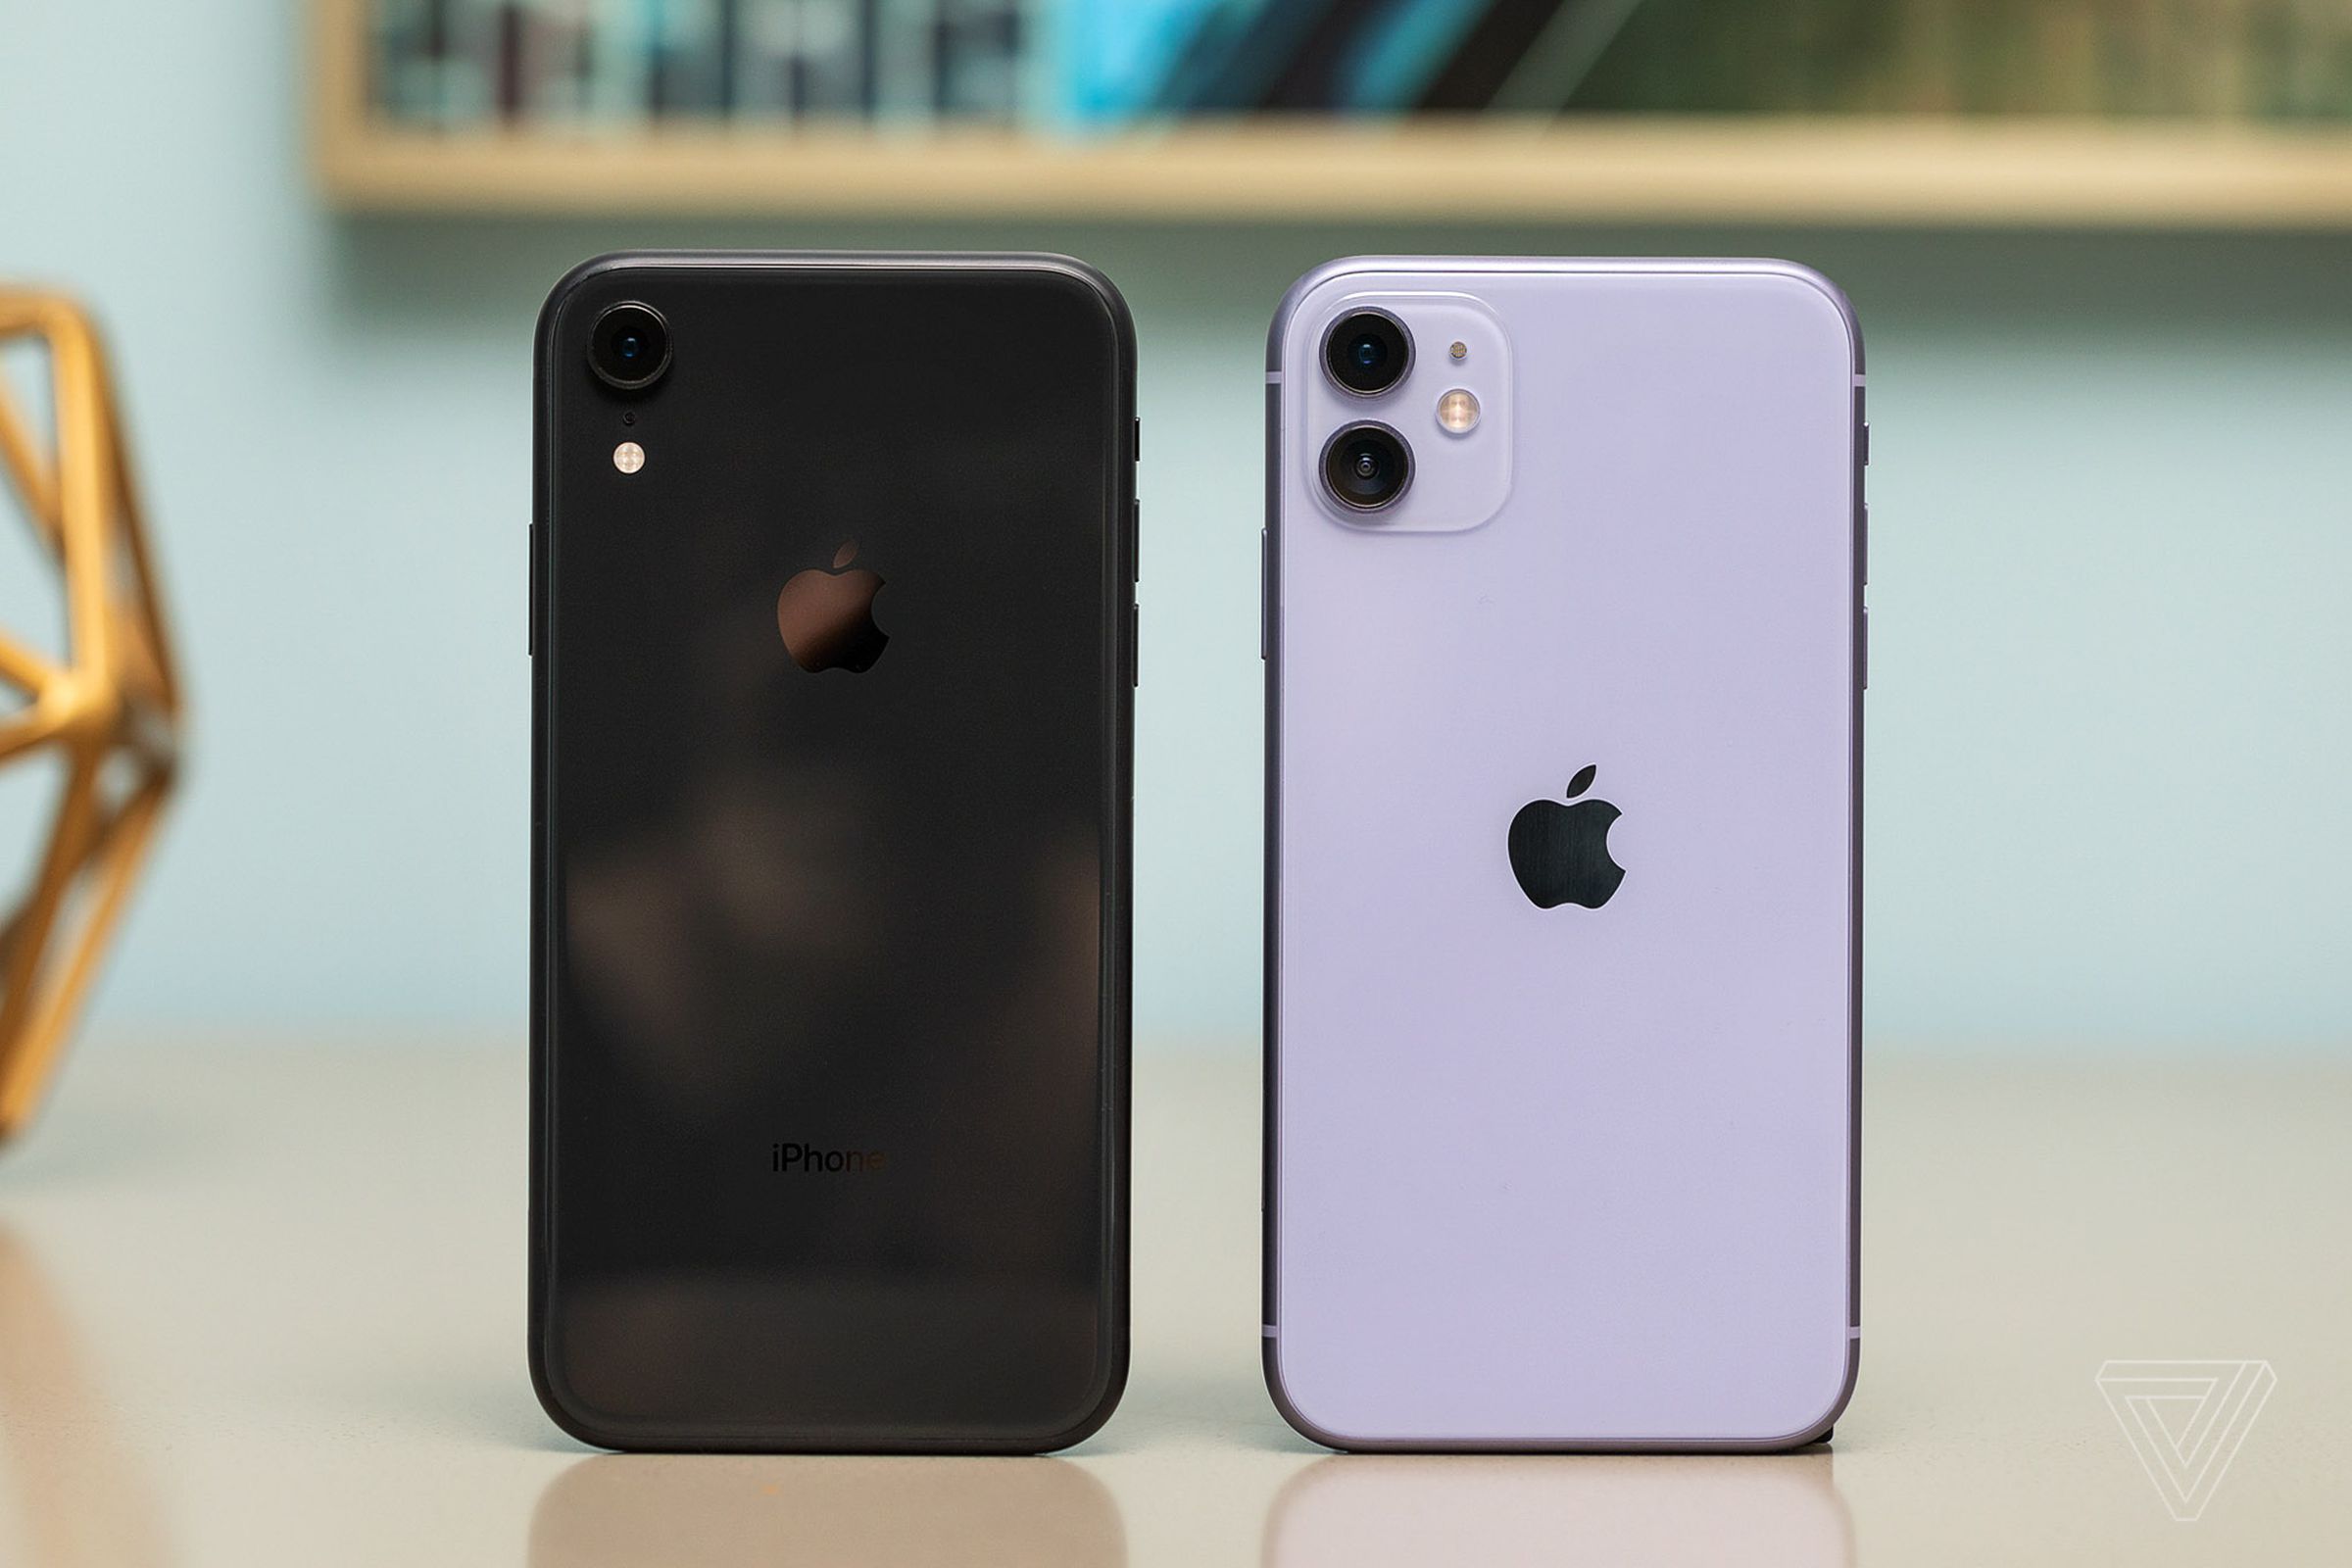 iPhone XR (left), iPhone 11 (right).